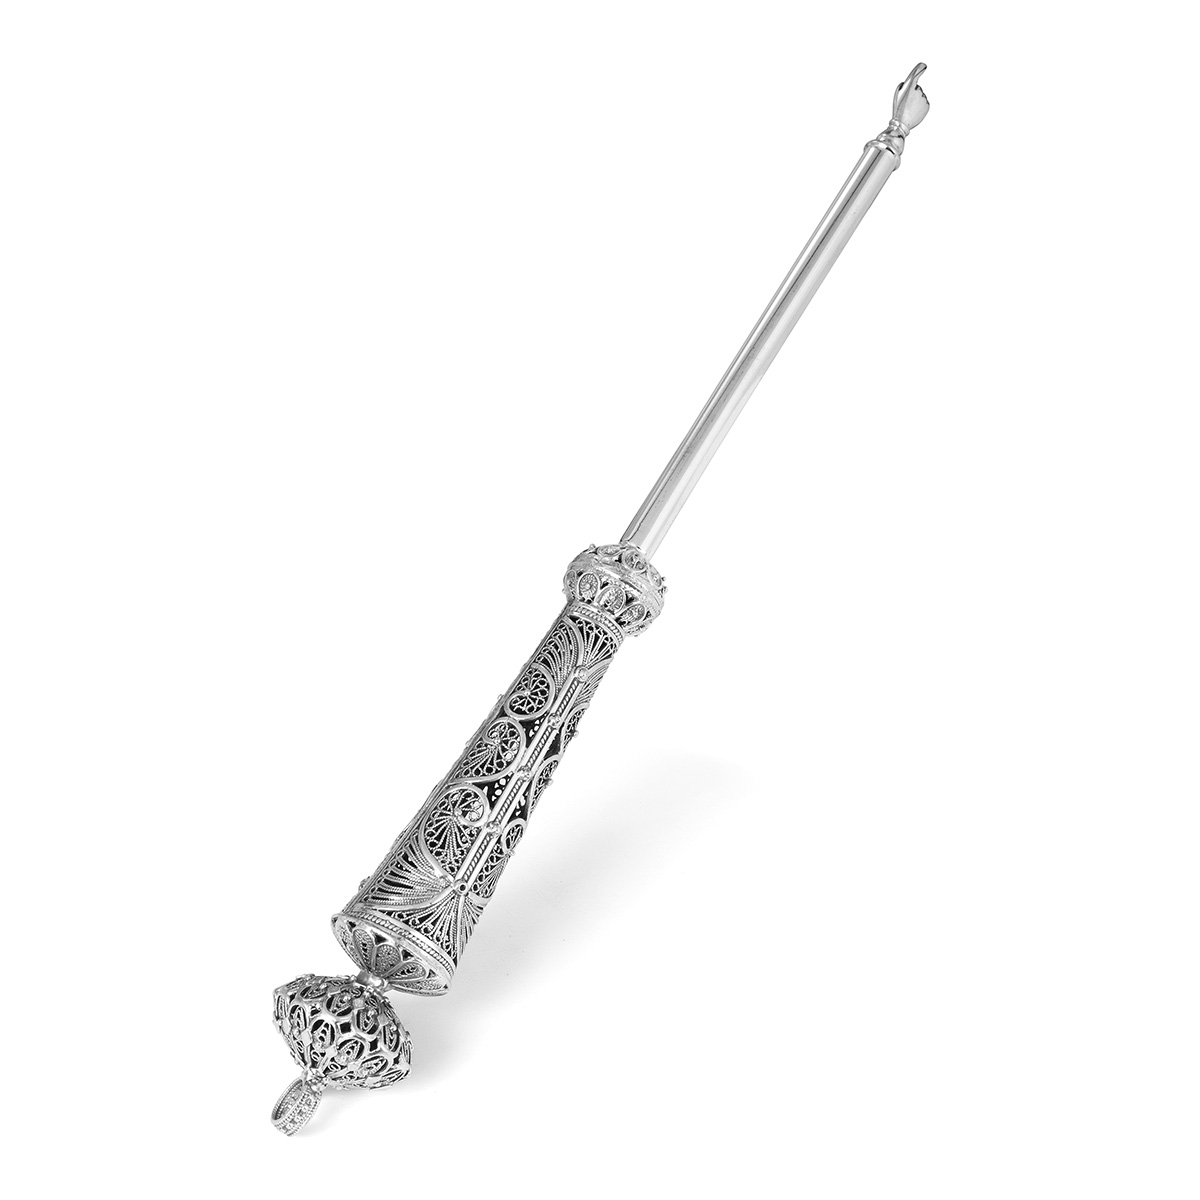 Traditional Yemenite Art Majestic Handcrafted Sterling Silver Yad (Torah Pointer) With Filigree Design - 1